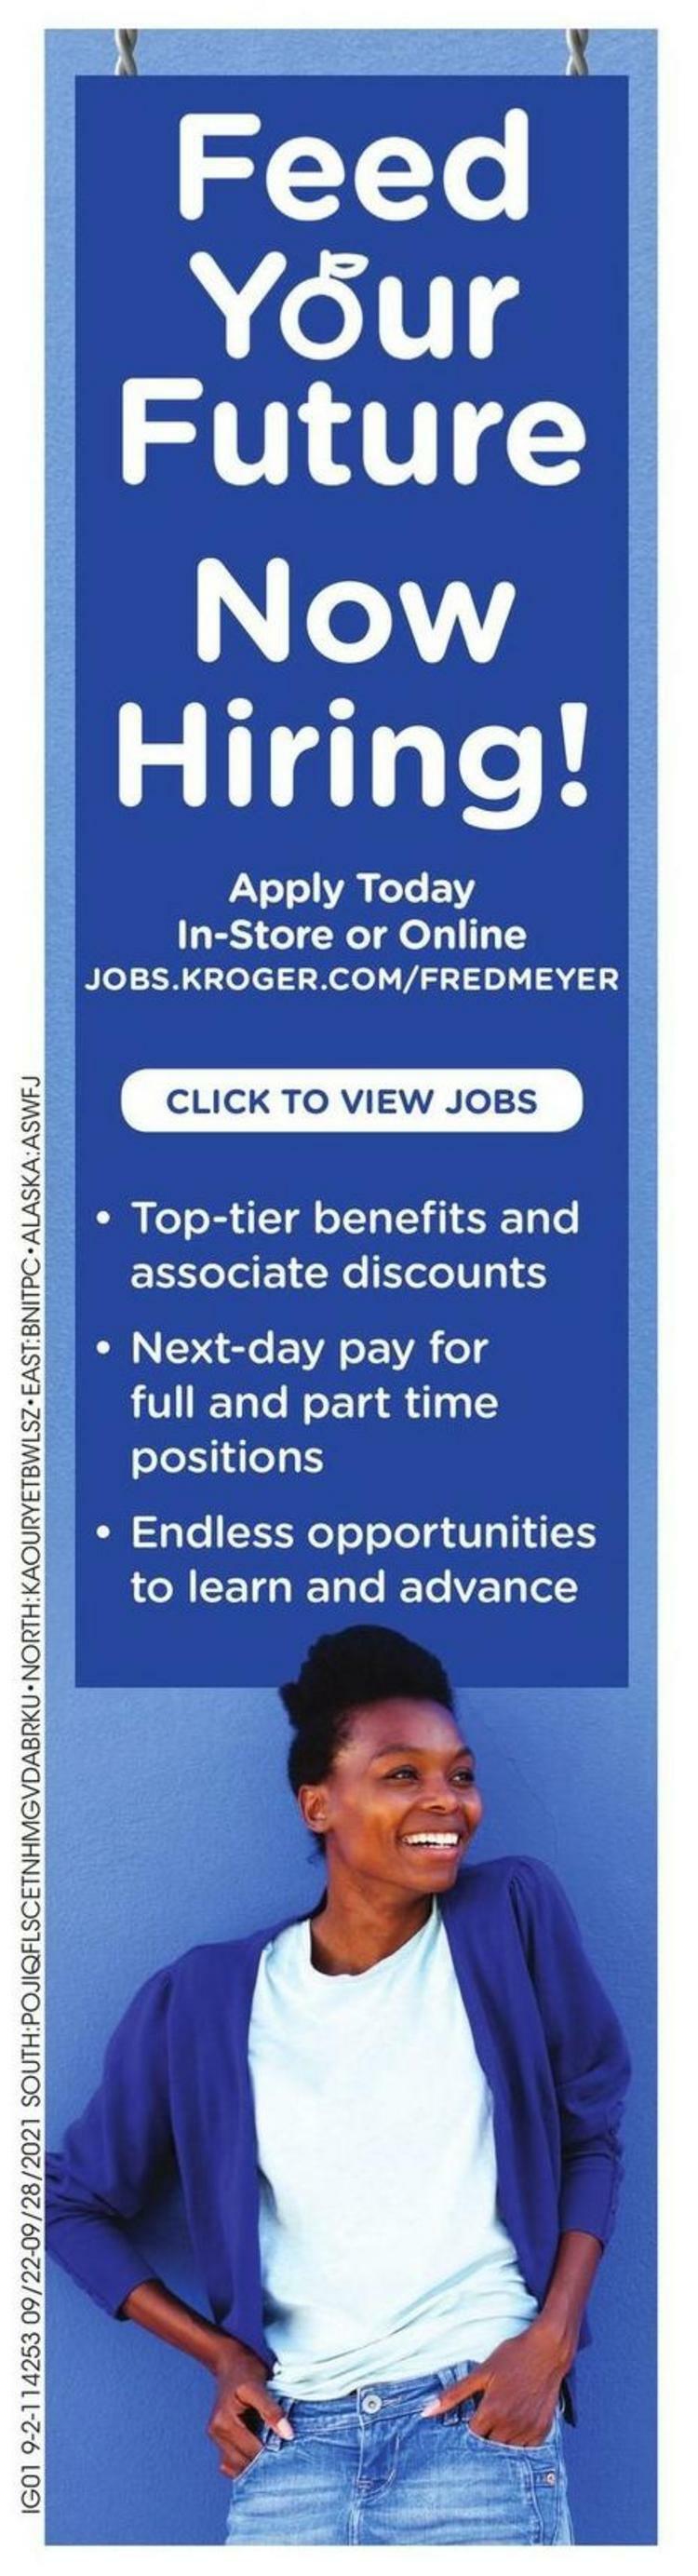 Fred Meyer Weekly Ad from September 22